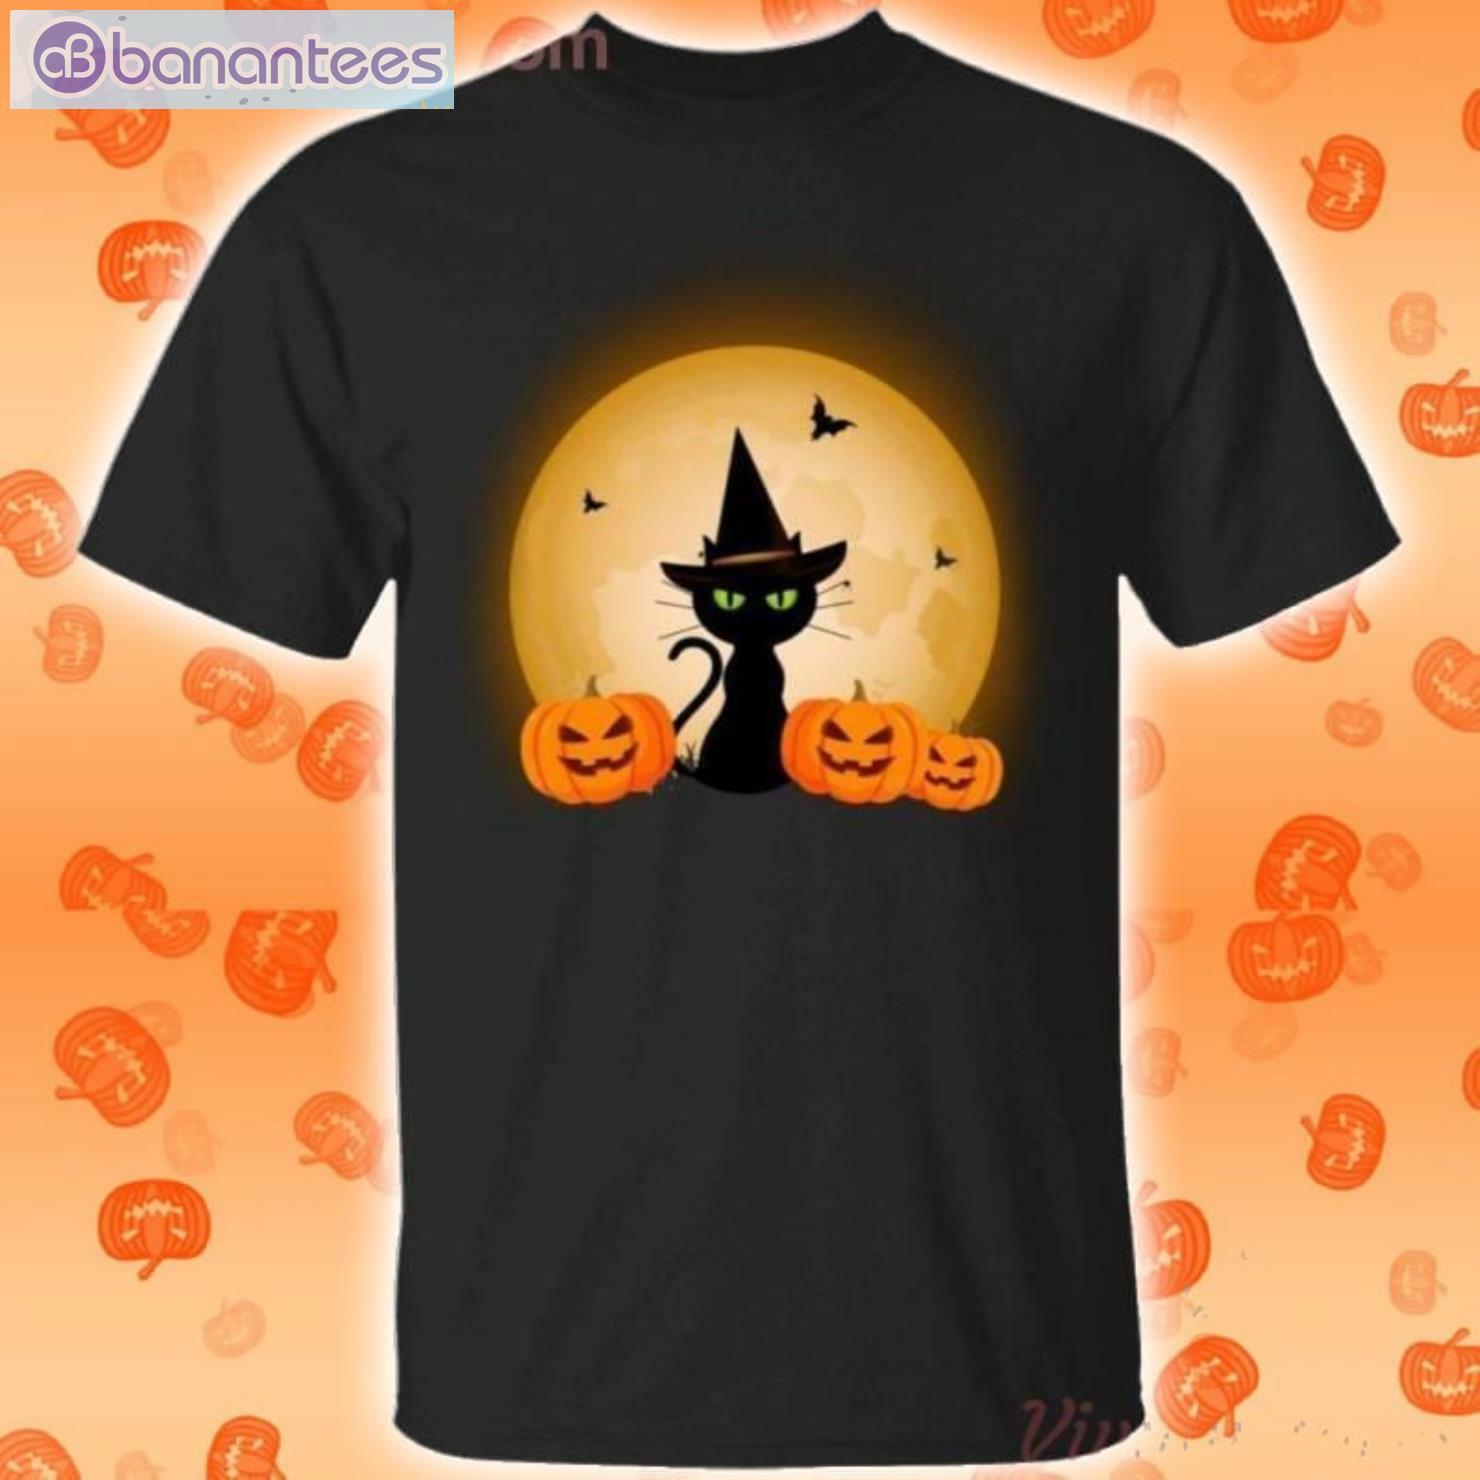 Black Cat Sit By The Moon Halloween T-Shirt Product Photo 1 Product photo 1